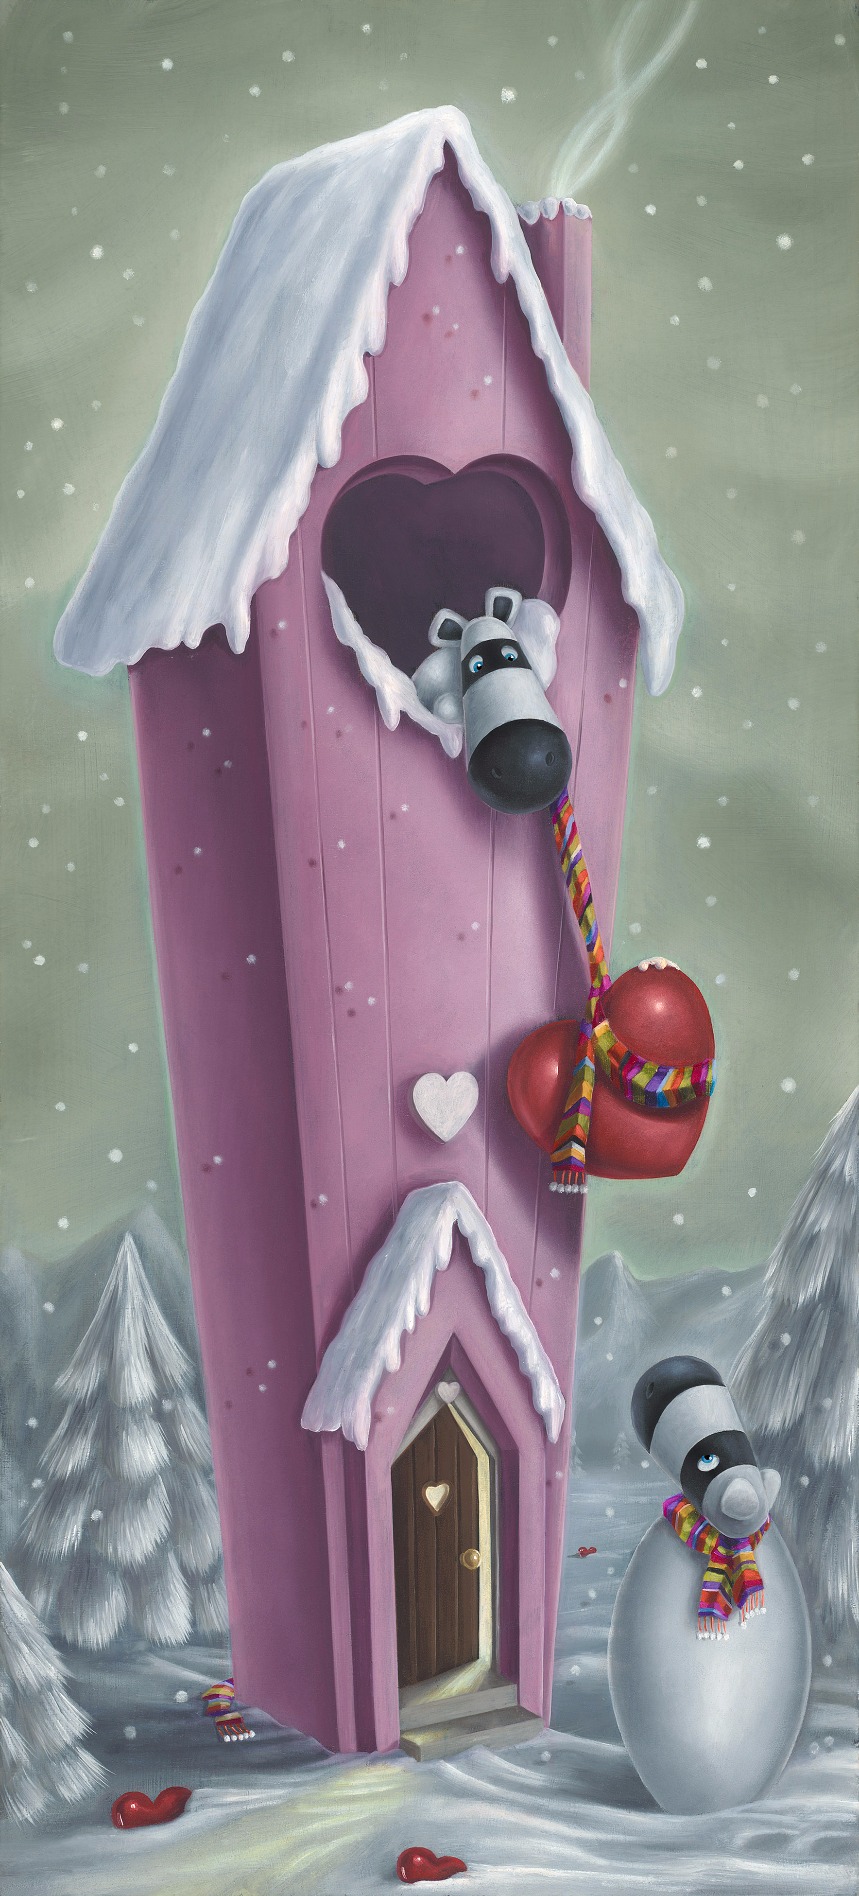 Snow Place Like Home by Peter Smith